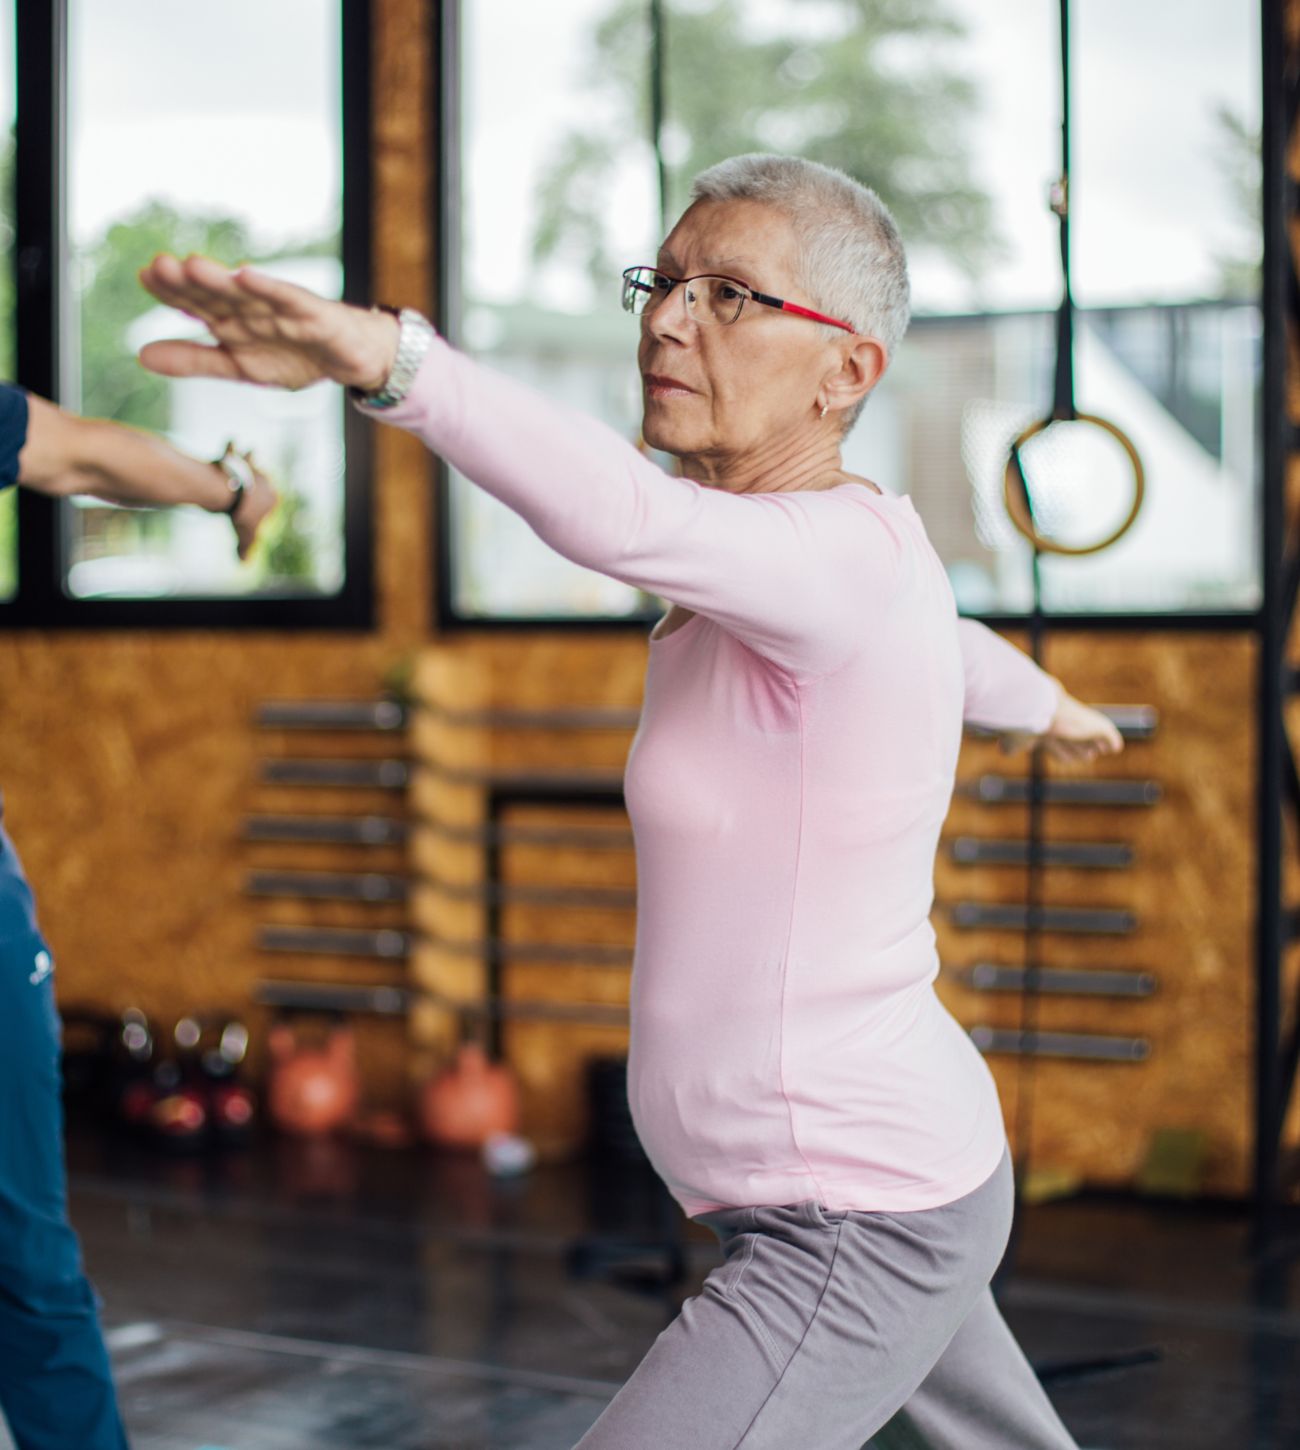 Photo of a mature woman in a yoga or tai chi pose in an exercise studio.